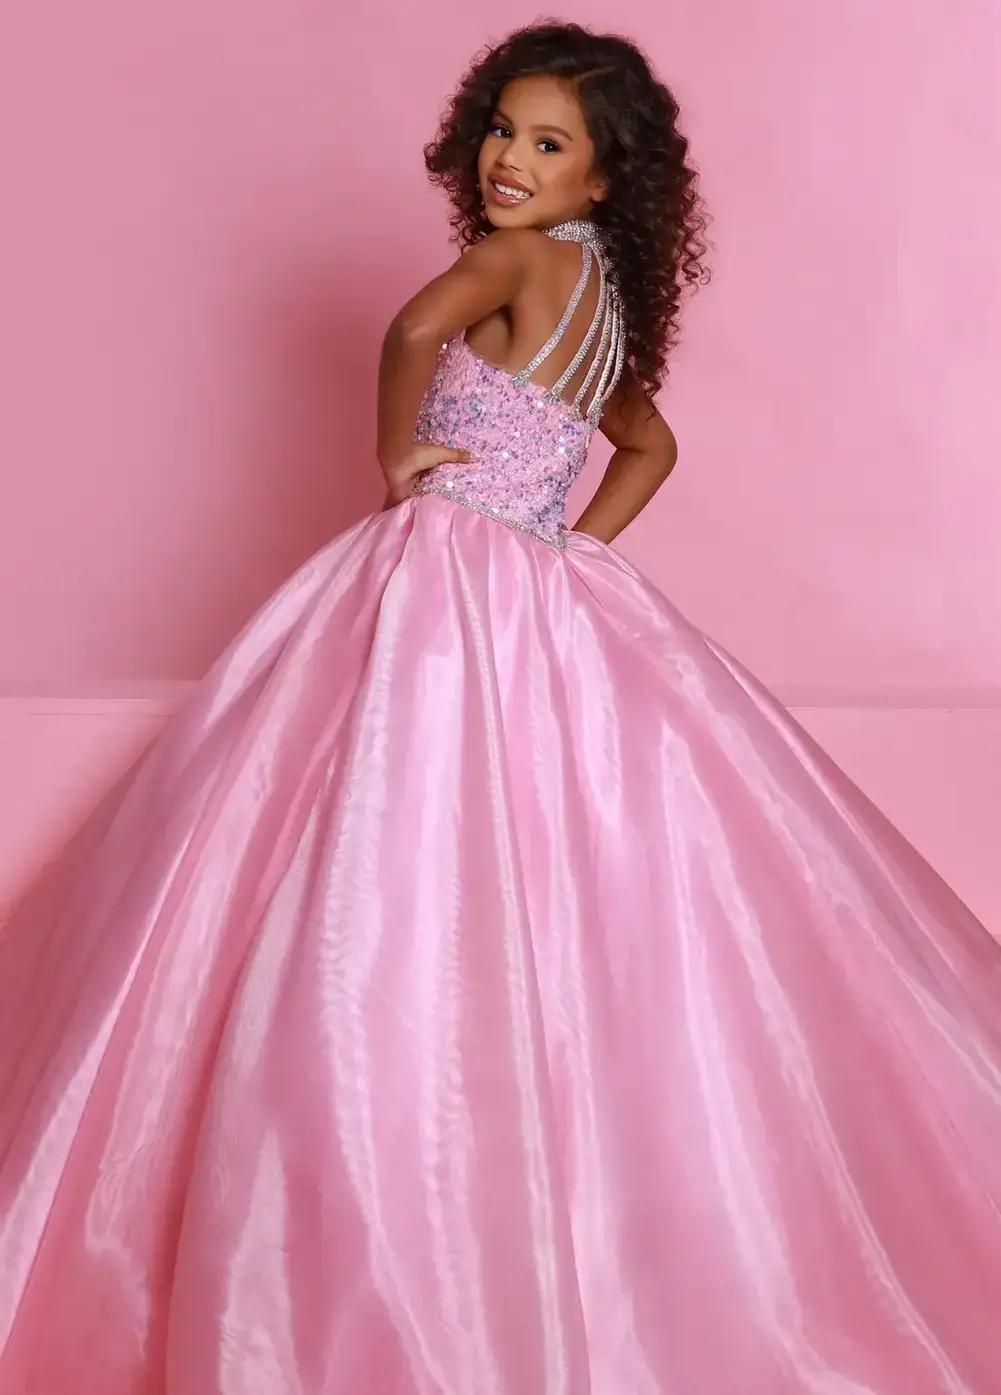 Pageant dress